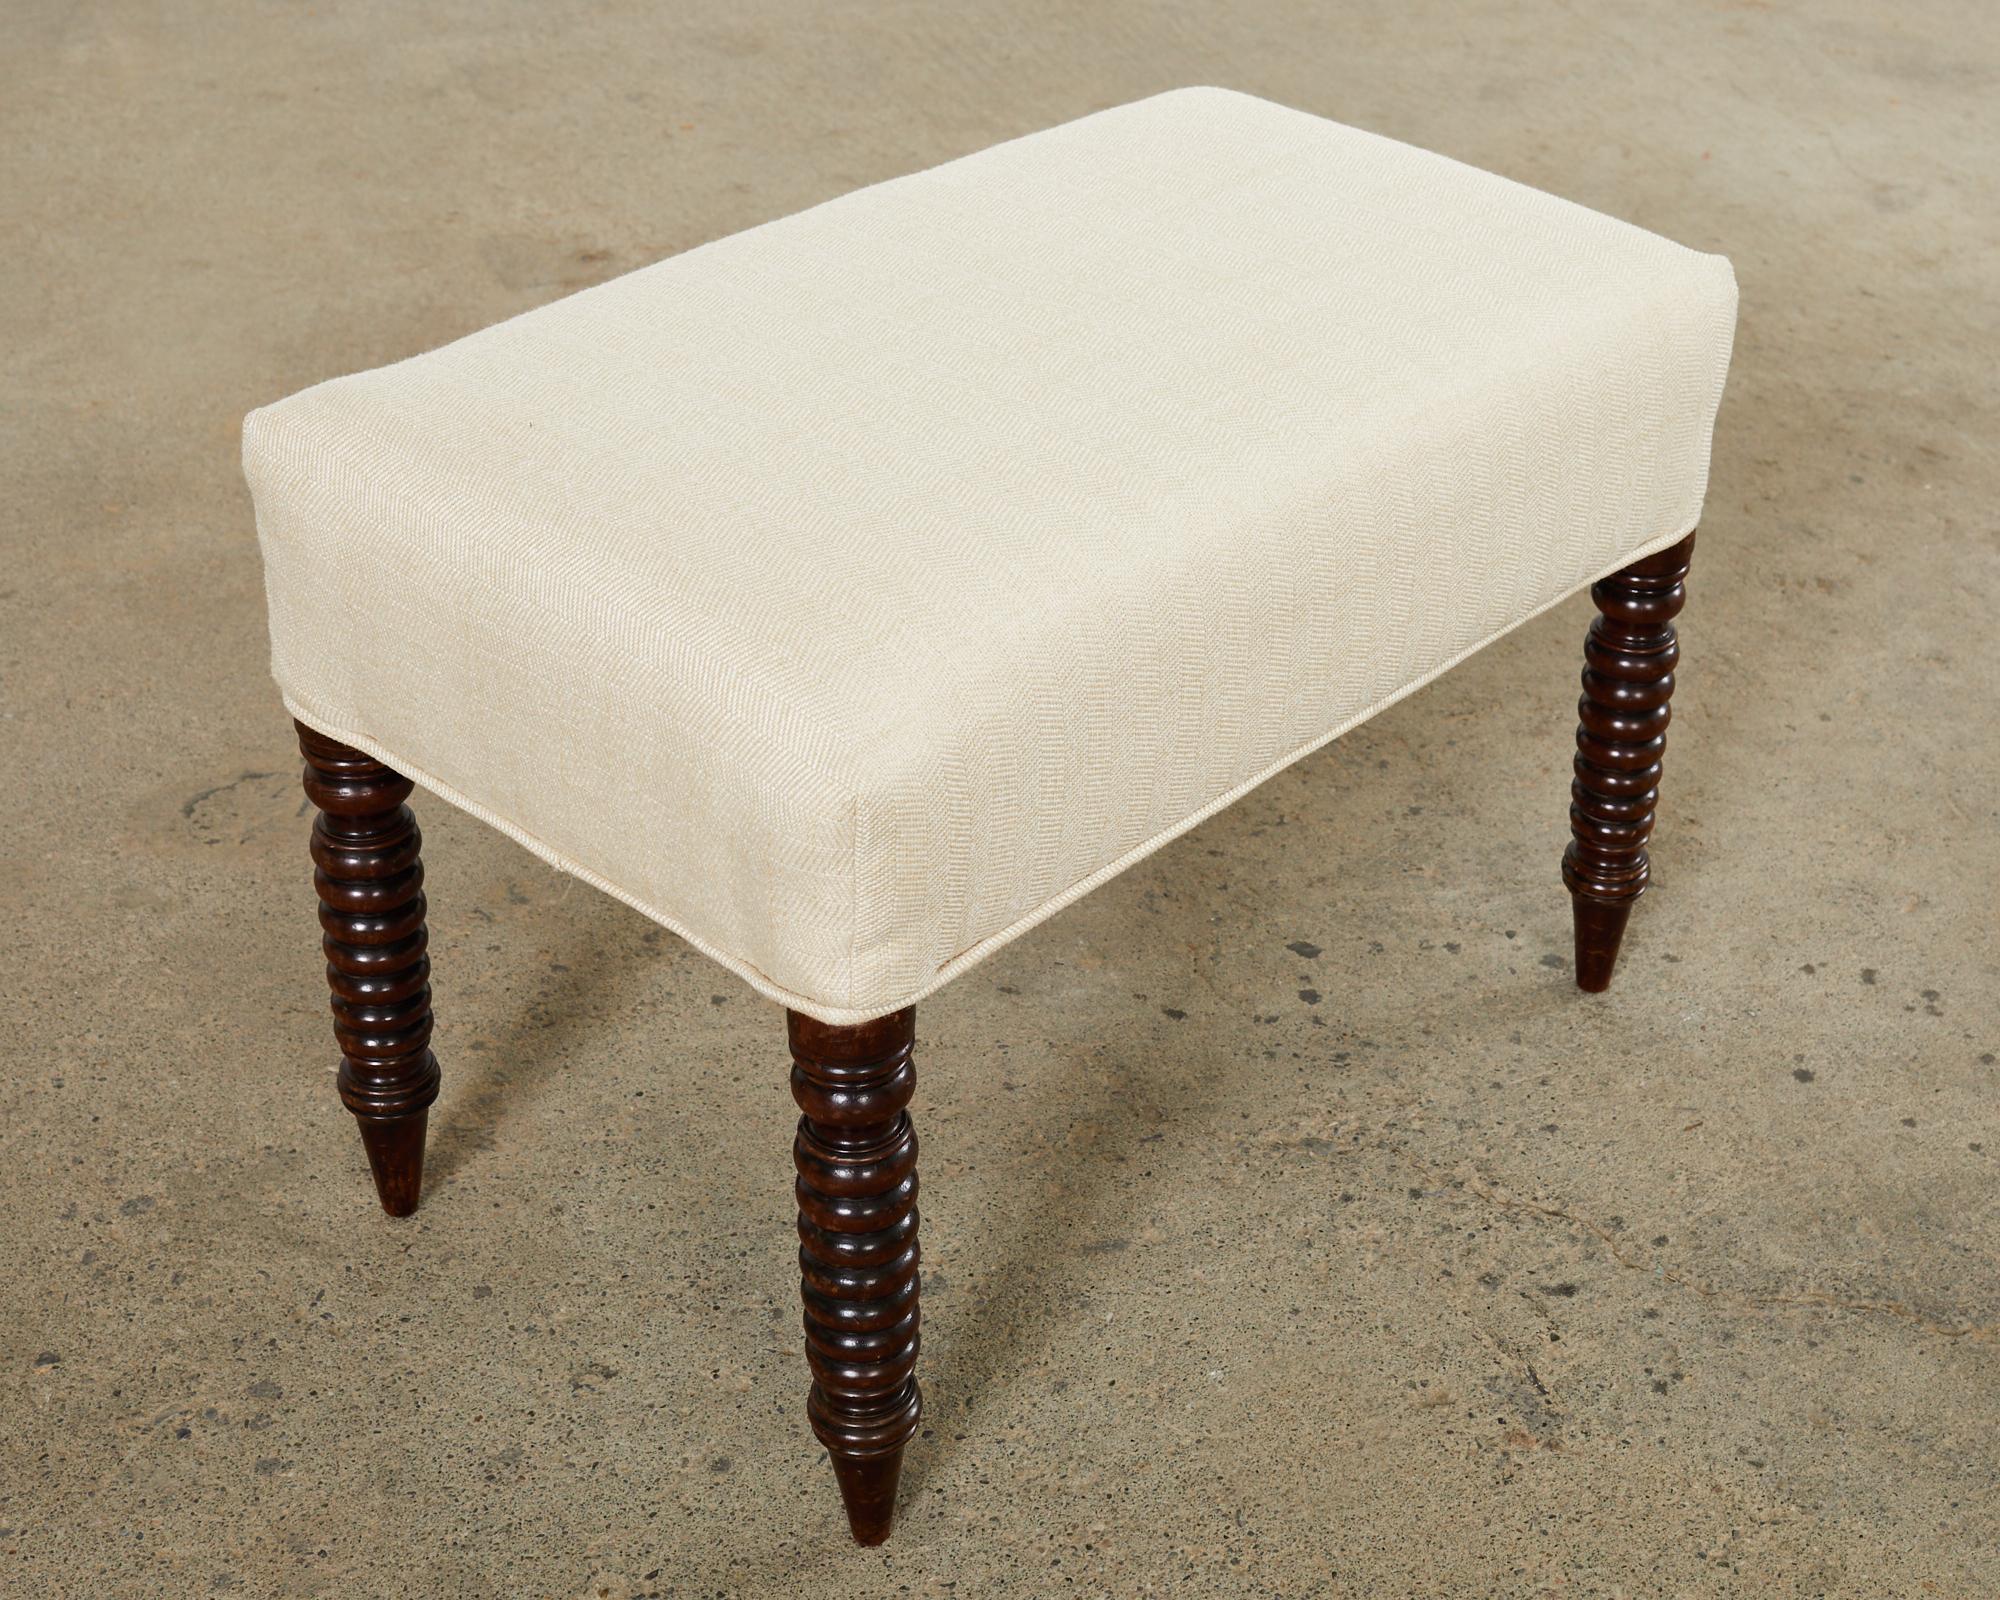 Hand-Crafted Walnut Footstool or Ottoman with Bobbin Turned Spool Legs